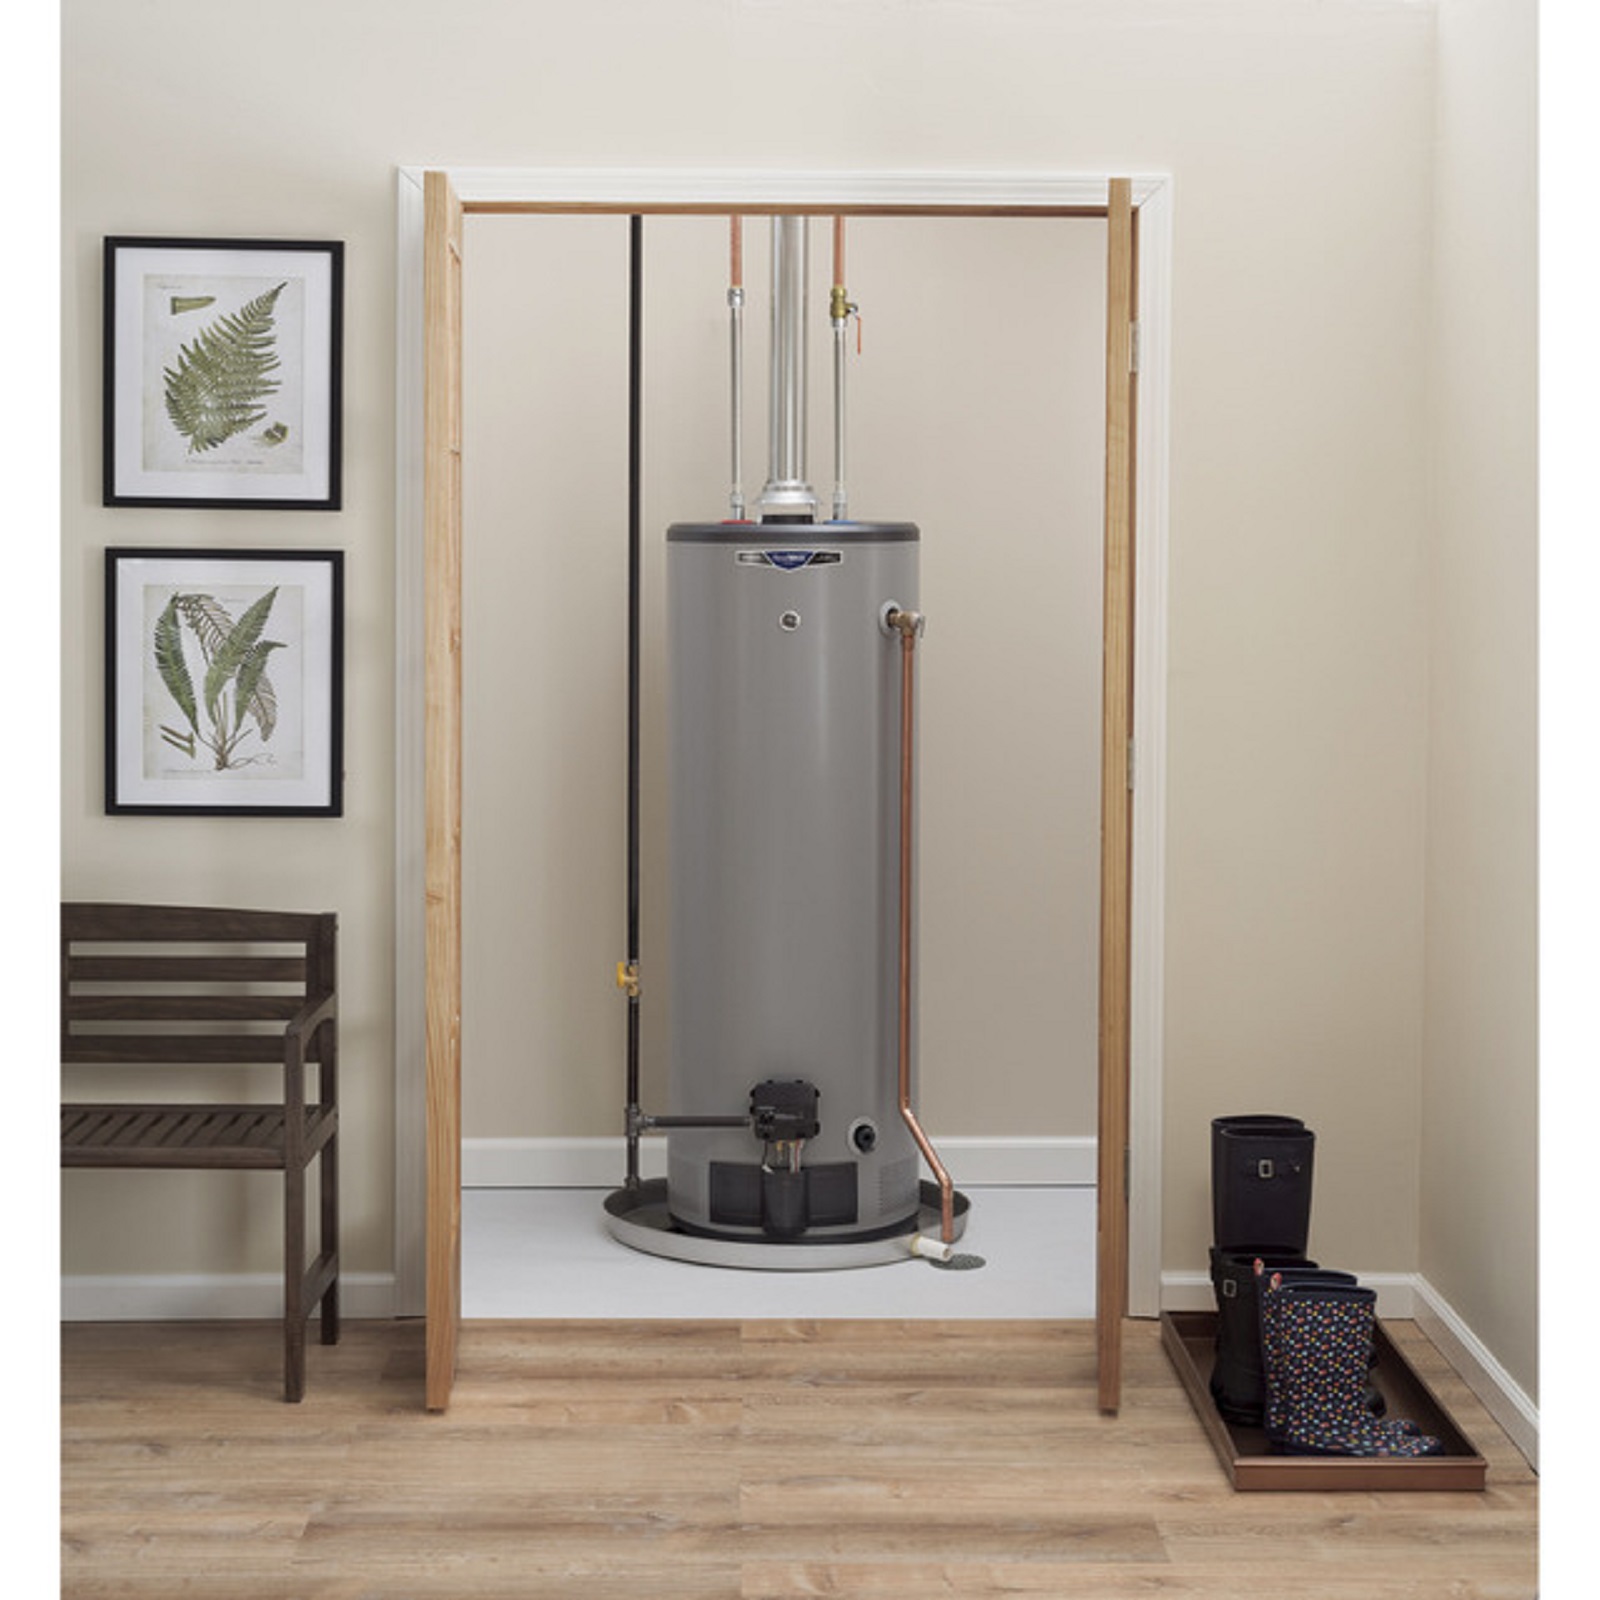 Kenmore 30 Gal Tall Gas Water Heater